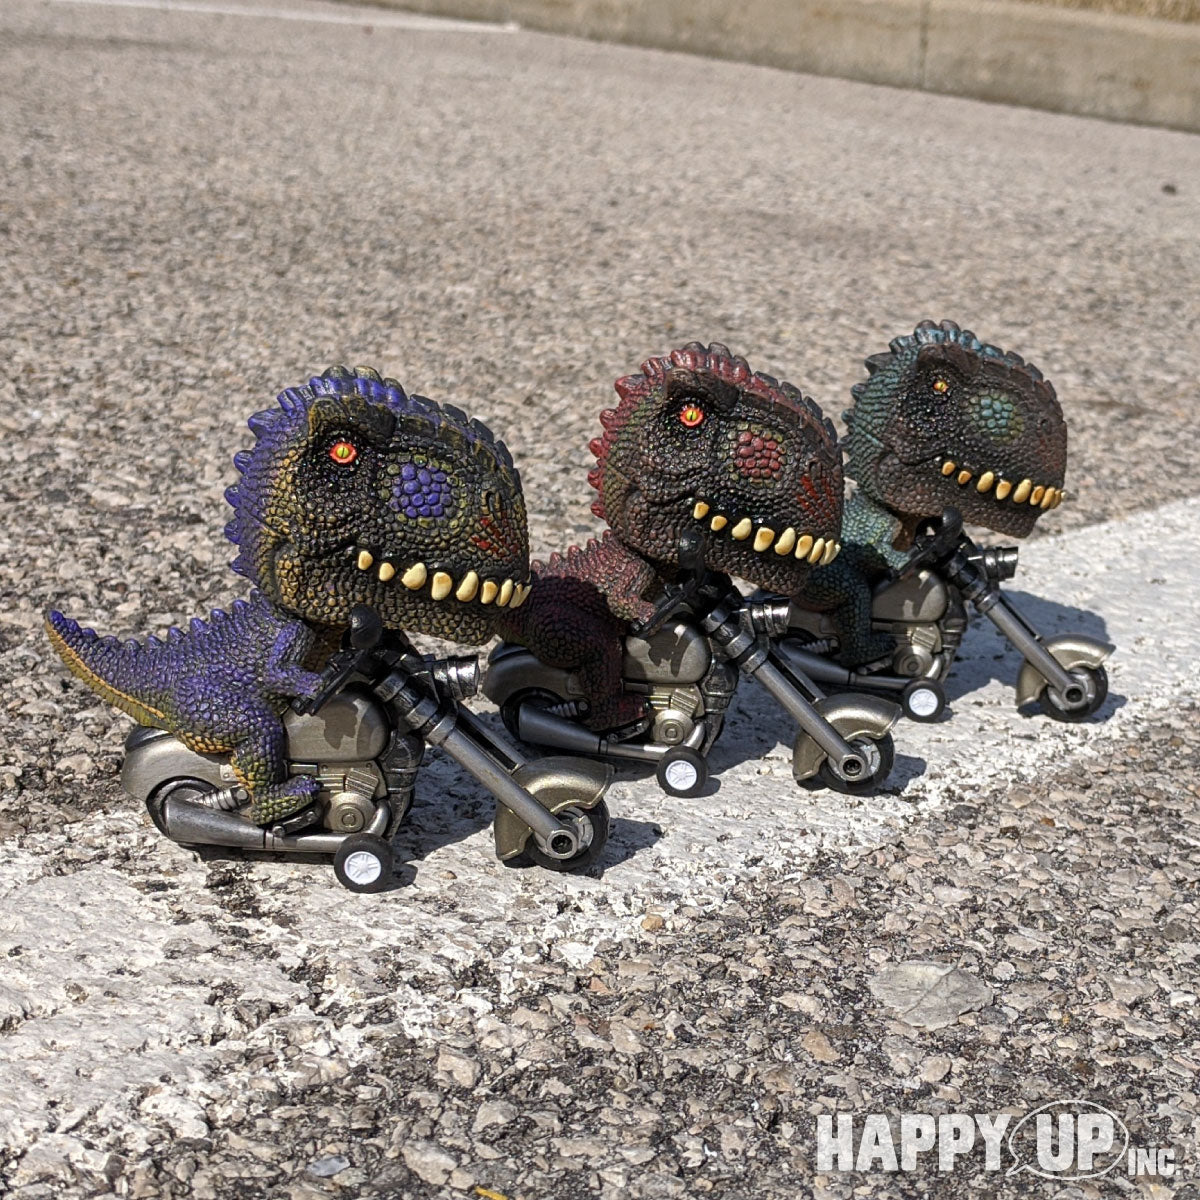 T-Rex Riders from Schylling